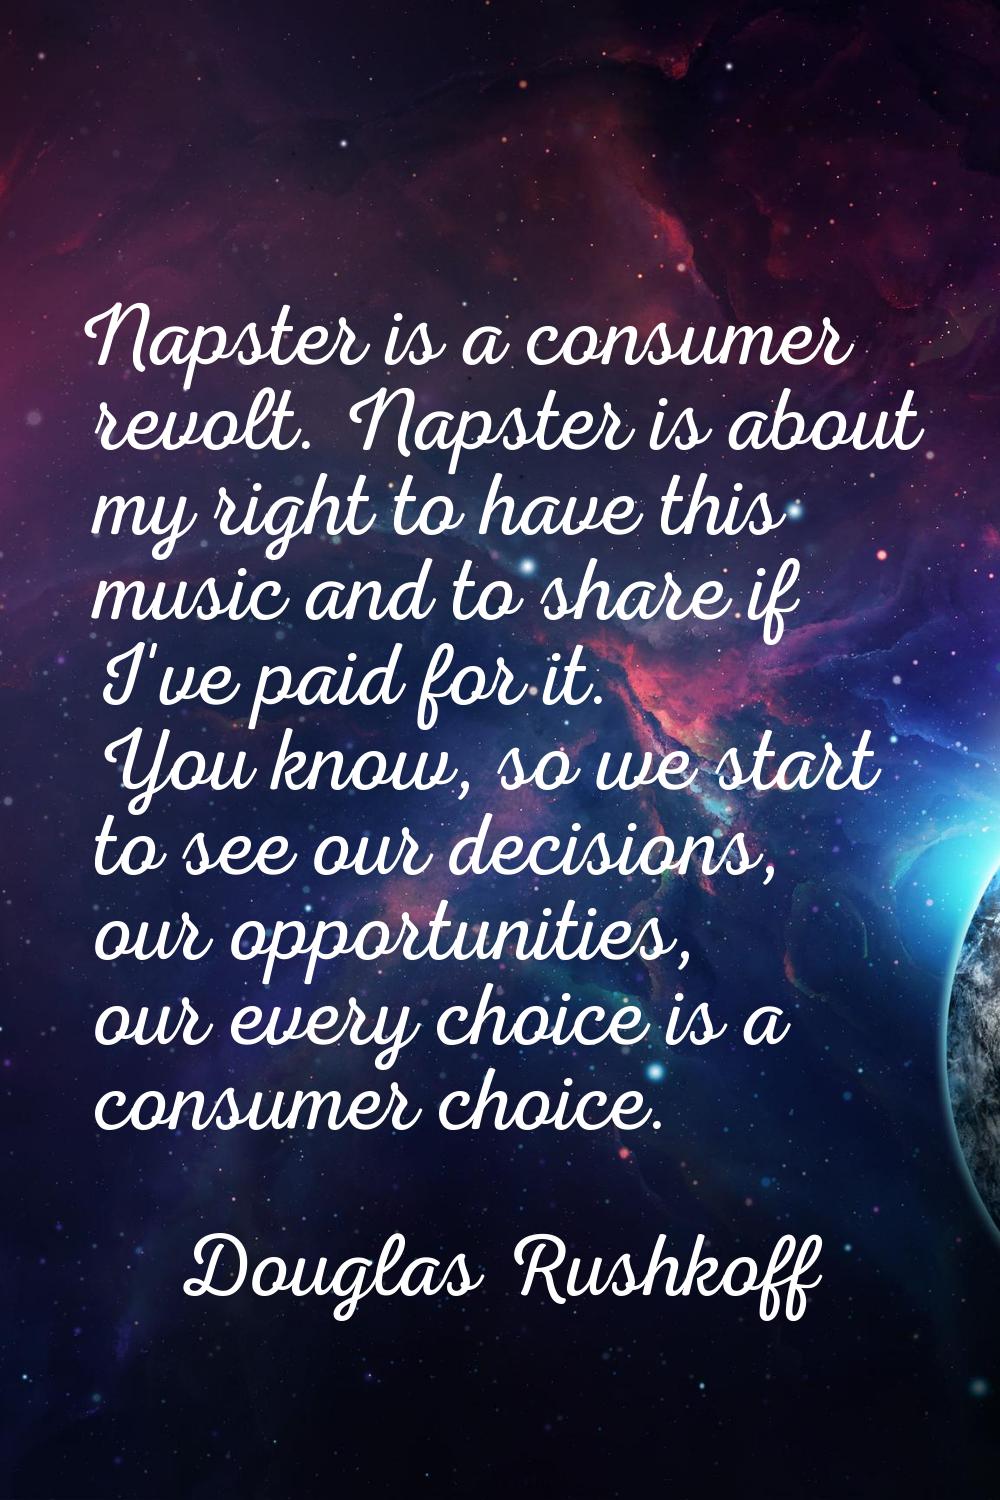 Napster is a consumer revolt. Napster is about my right to have this music and to share if I've pai